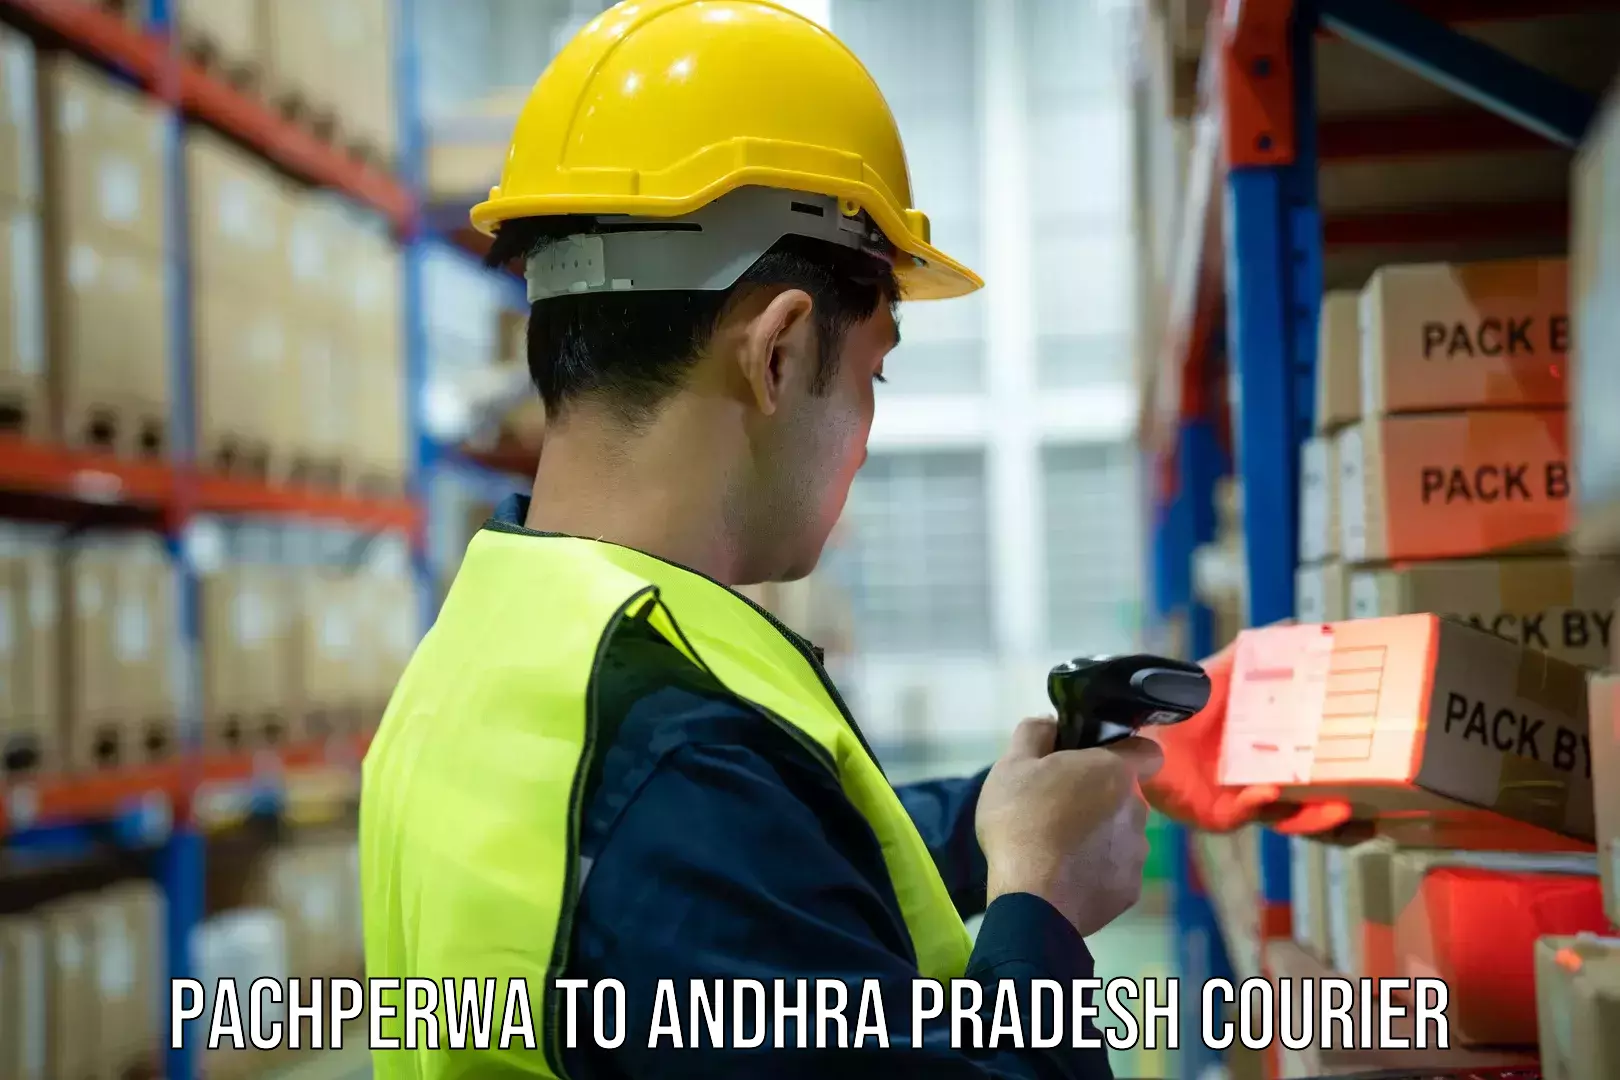 Parcel service for businesses Pachperwa to Visakhapatnam Port